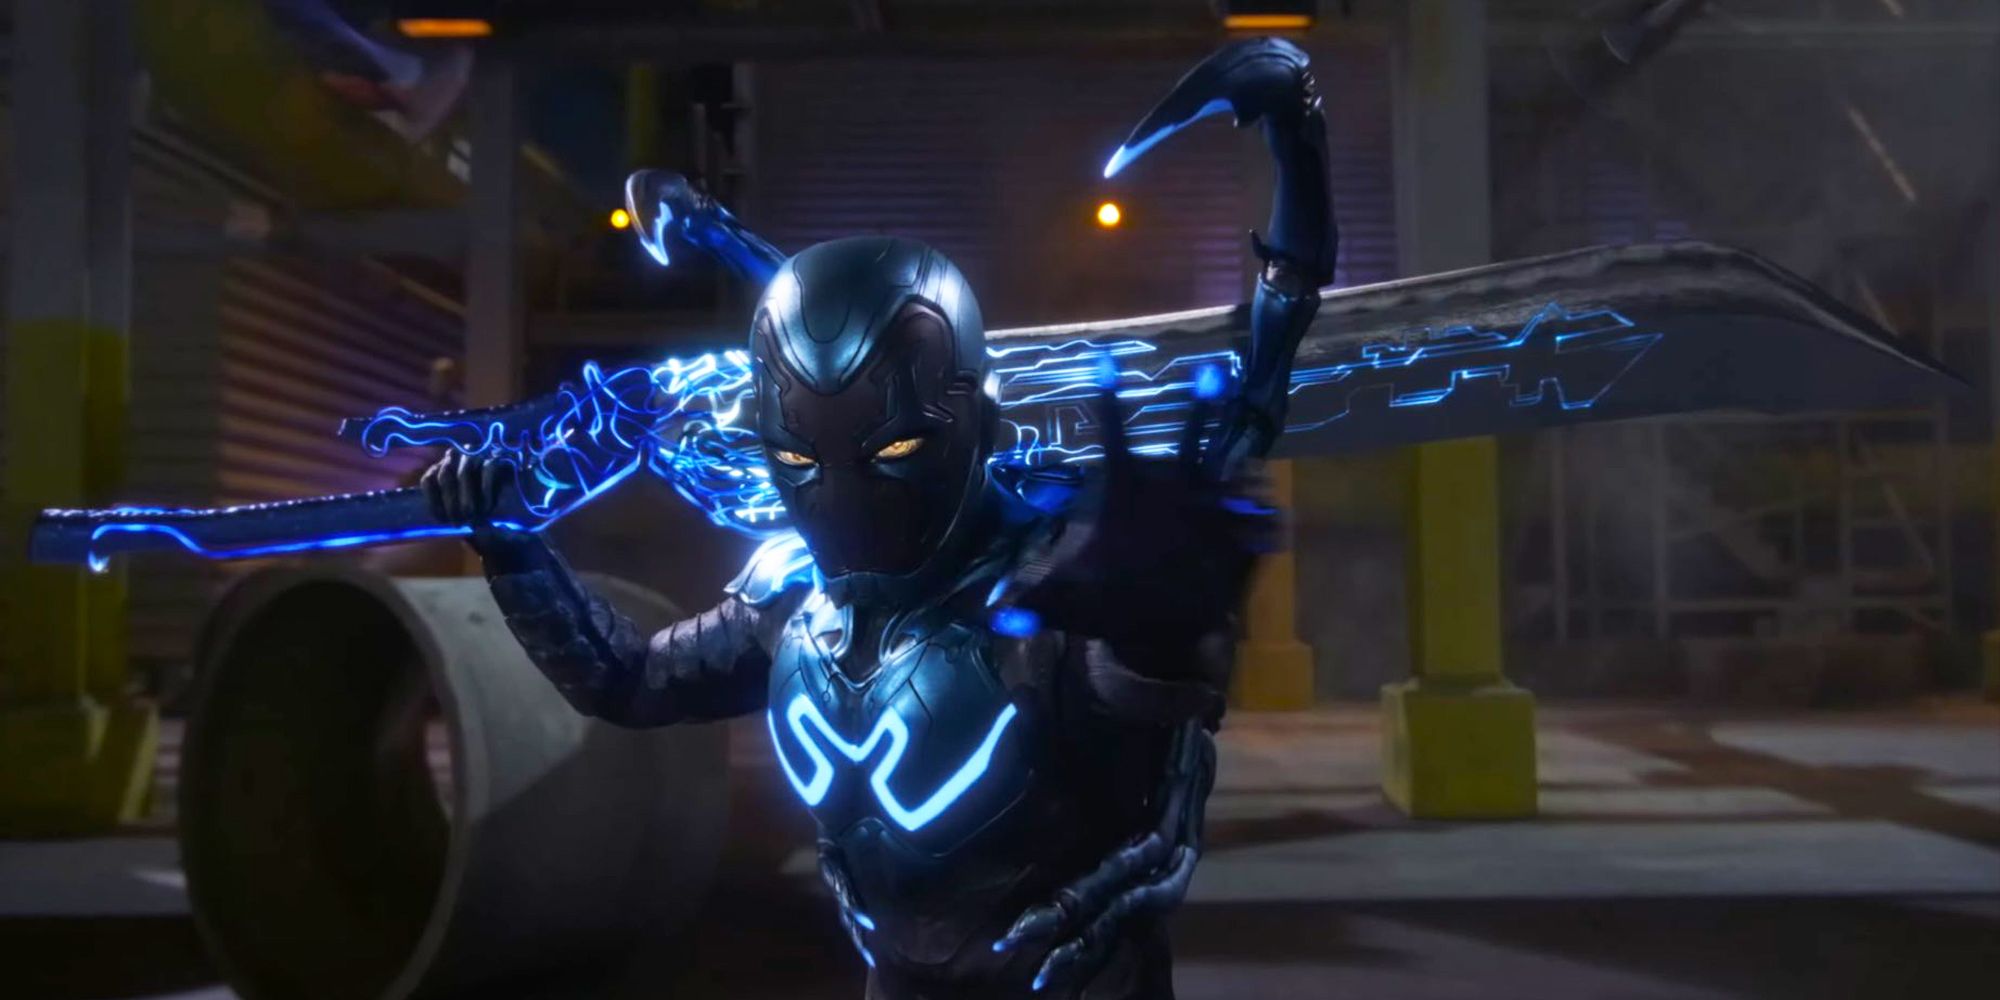 Blue Beetle holding Cloud's Buster Sword in new trailer